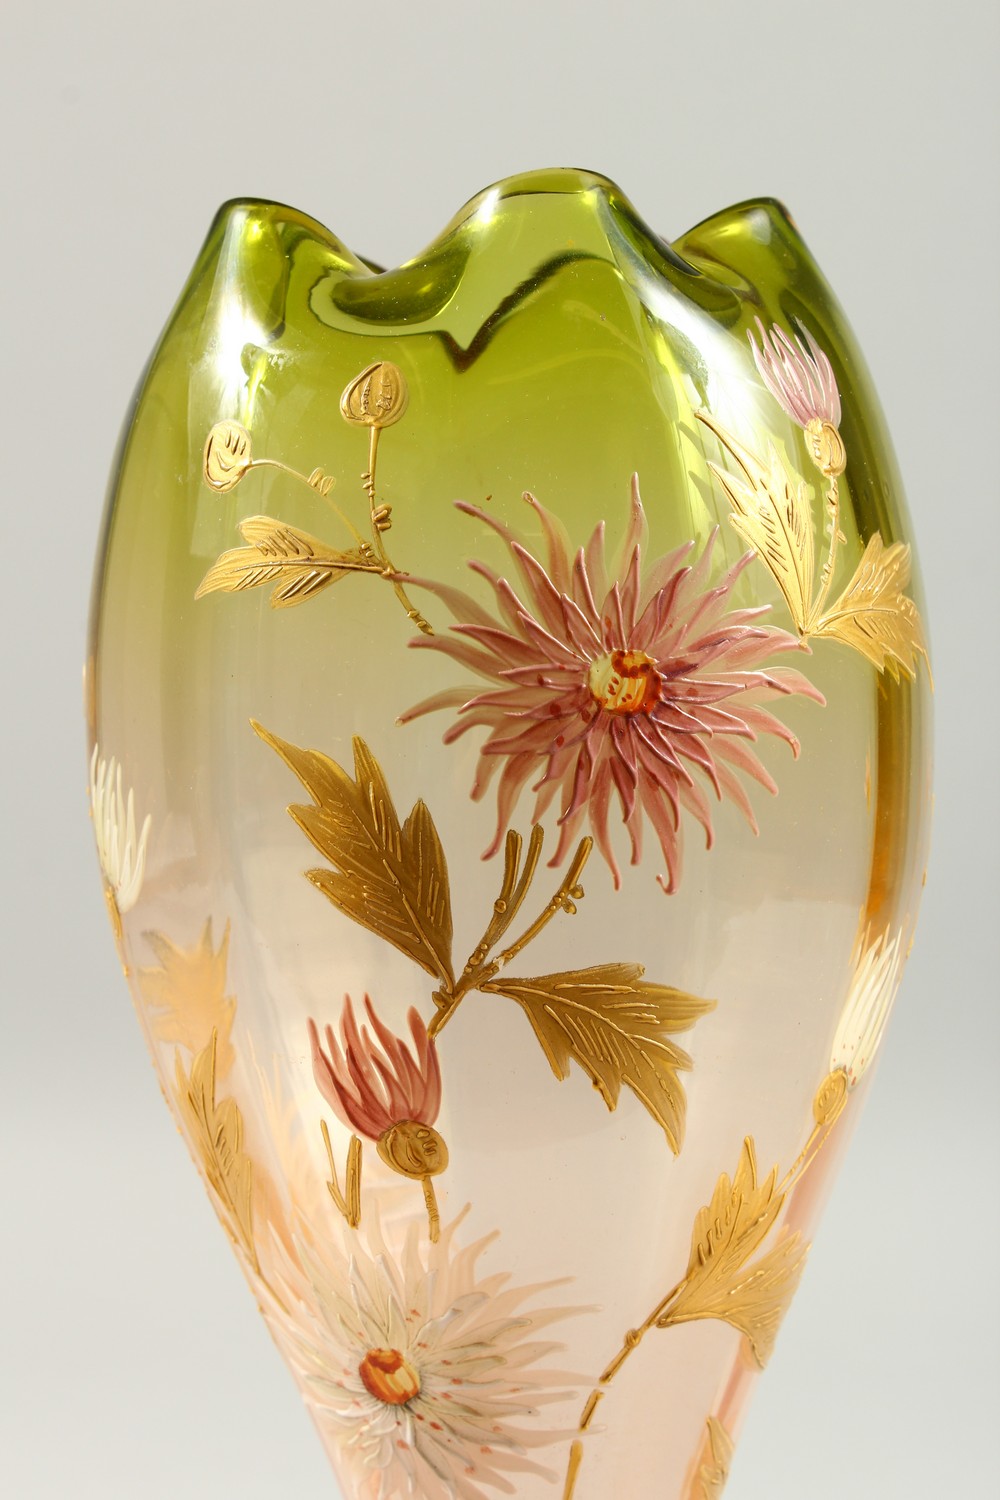 A WEBB'S TYPE BUD SHAPED PEDESTAL VASE, enamel and gilt decorated with flowers. 11.75ins high. - Image 2 of 7